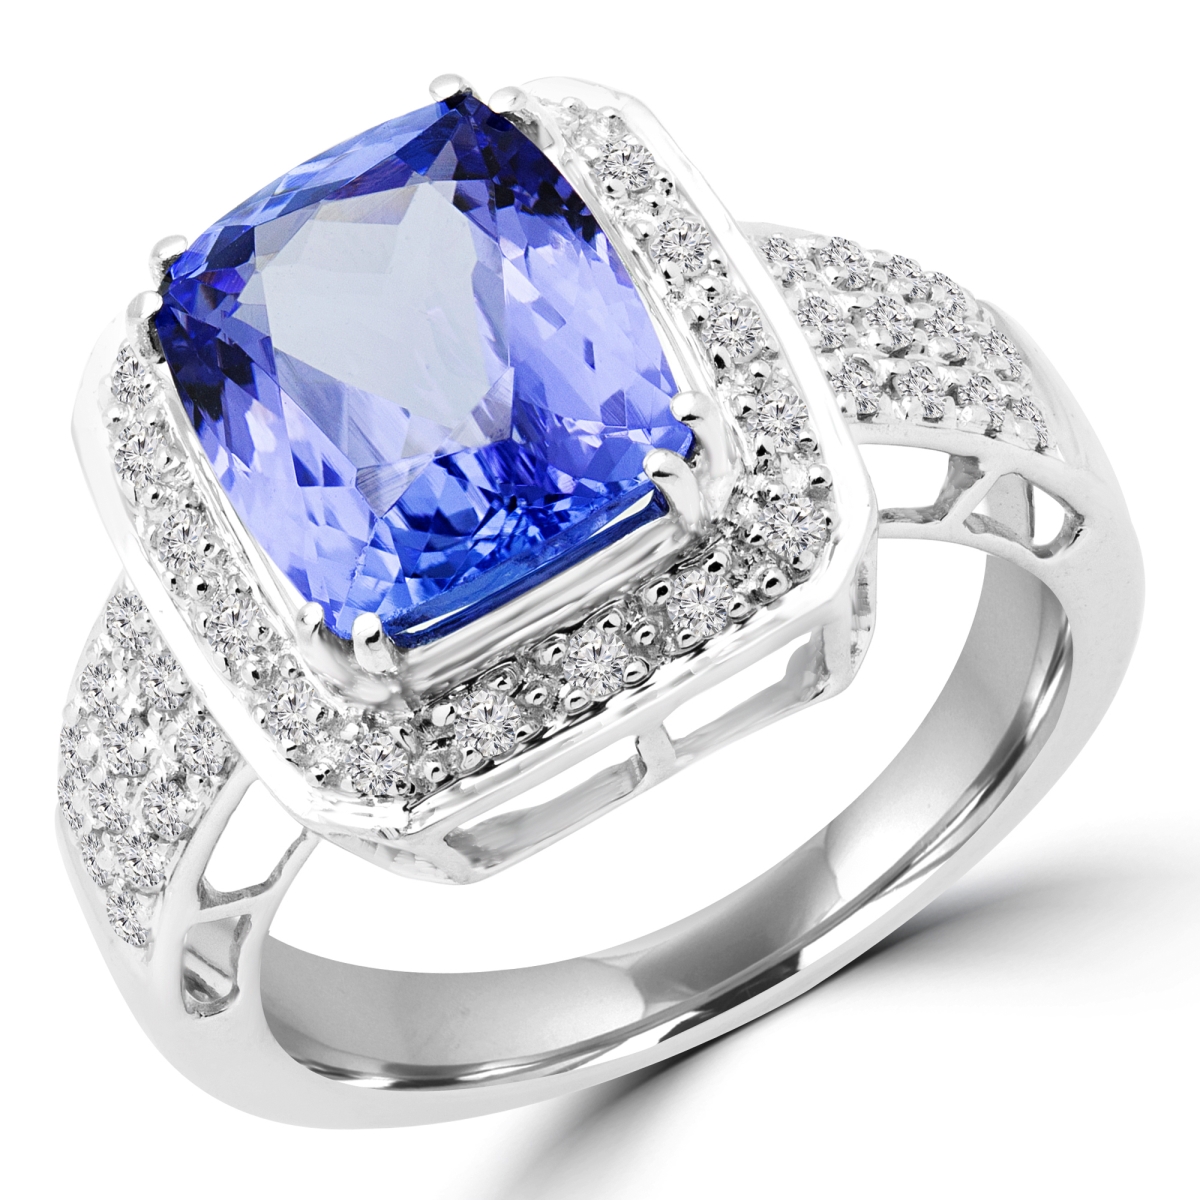 Picture of Majesty Diamonds MD180161-P 3.5 CTW Cushion Purple Tanzanite Halo Cocktail Ring in 14K White Gold